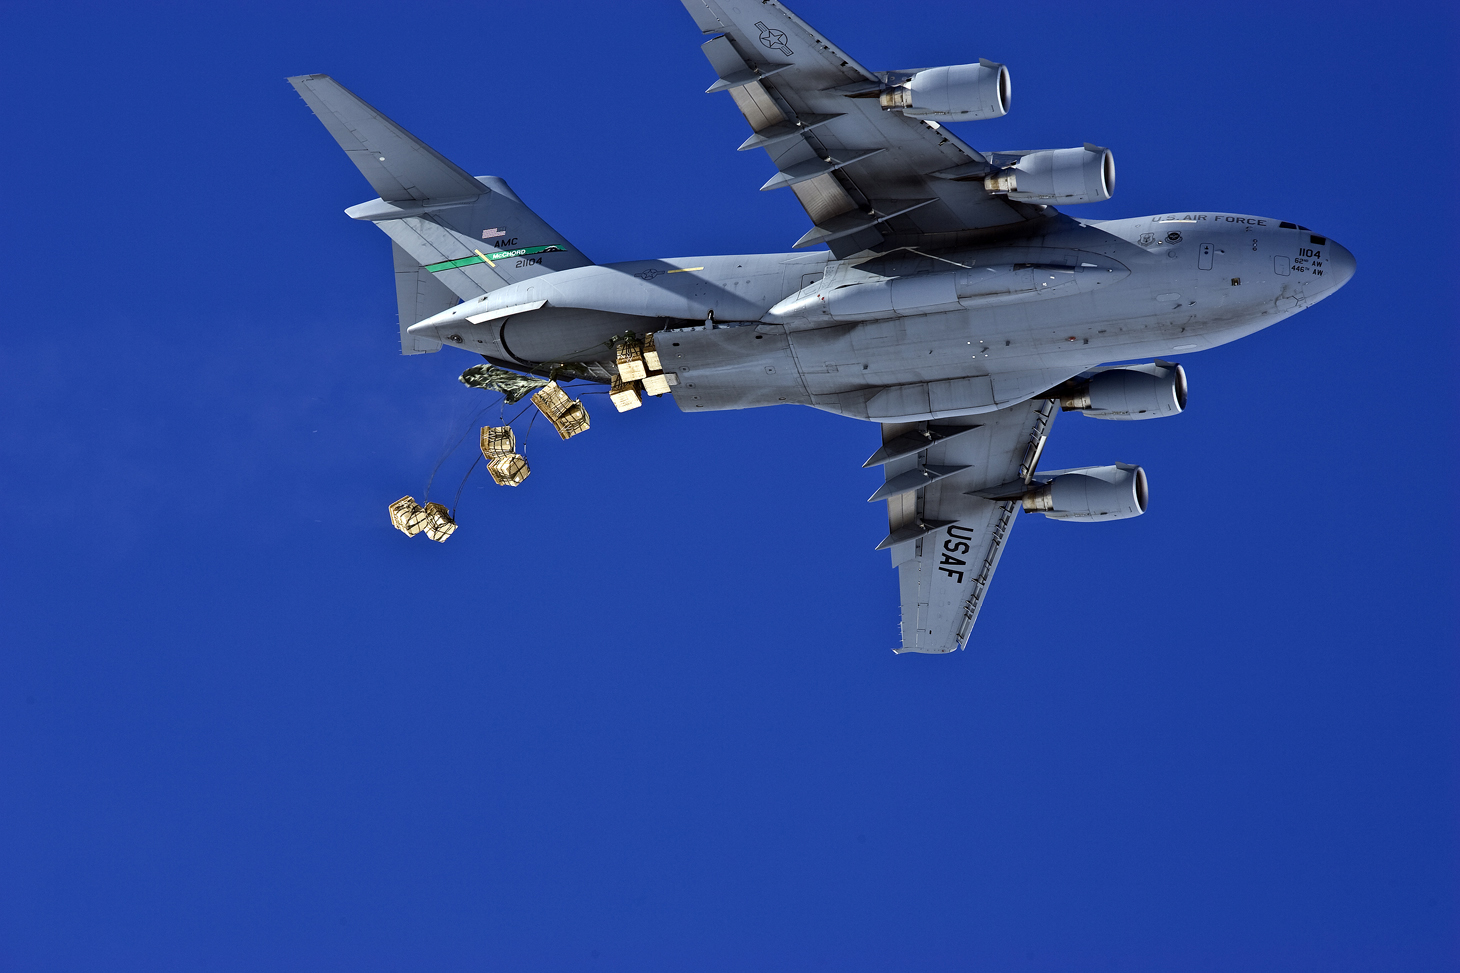 A jet releases cargo with parachutes.